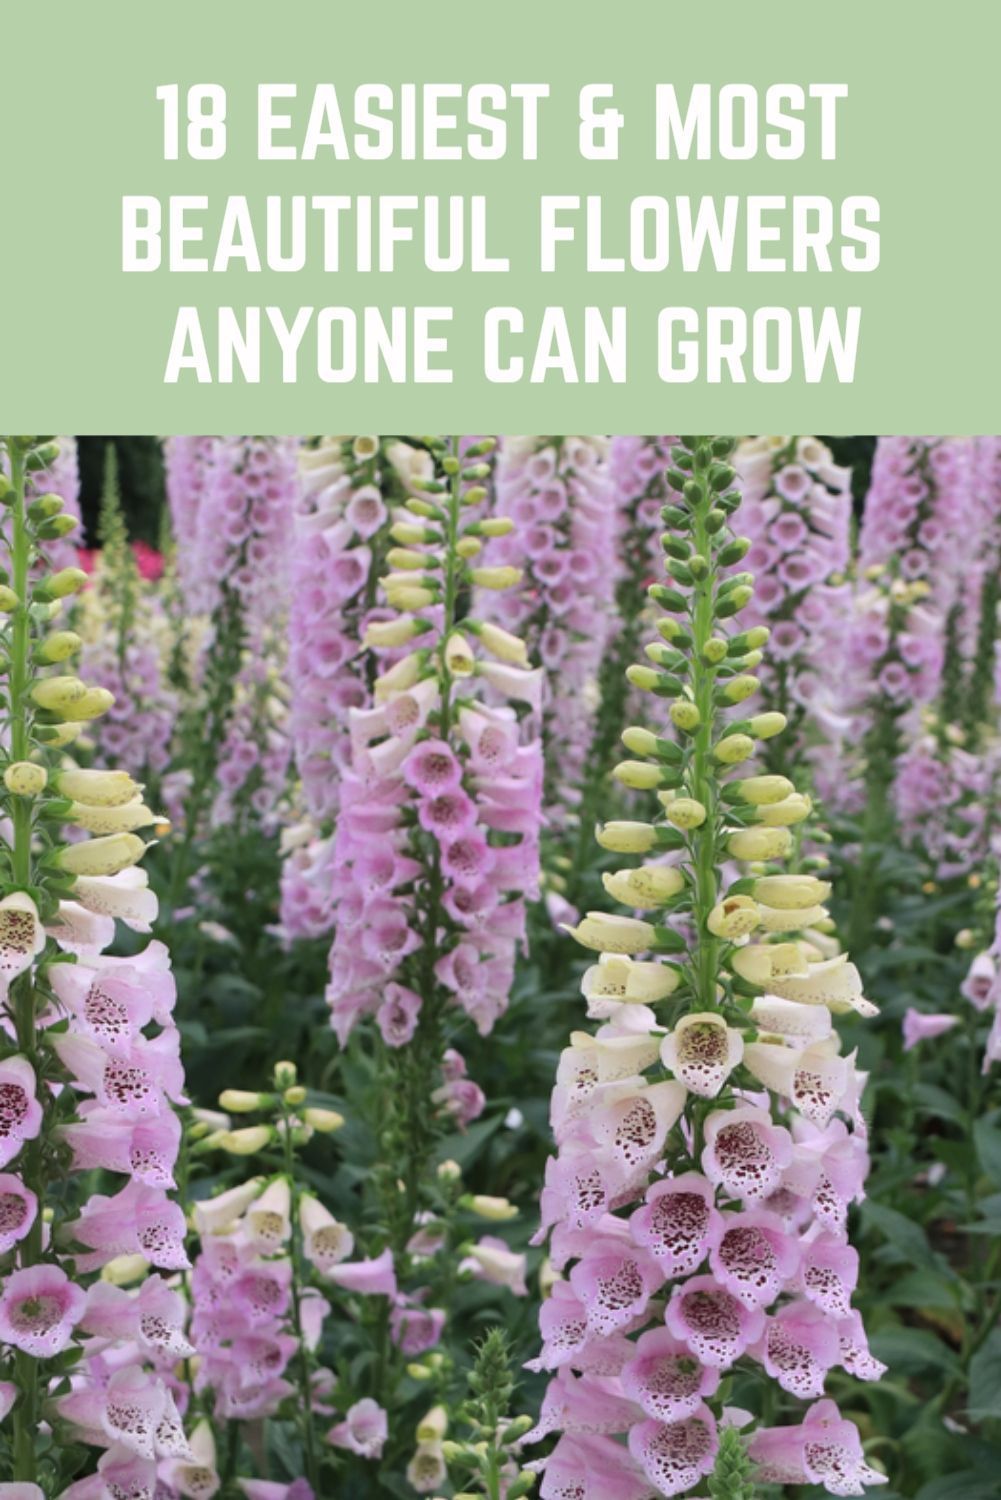 18 Easiest & Most Beautiful Flowers Anyone Can Grow In Their Garden -   most beauty Flowers